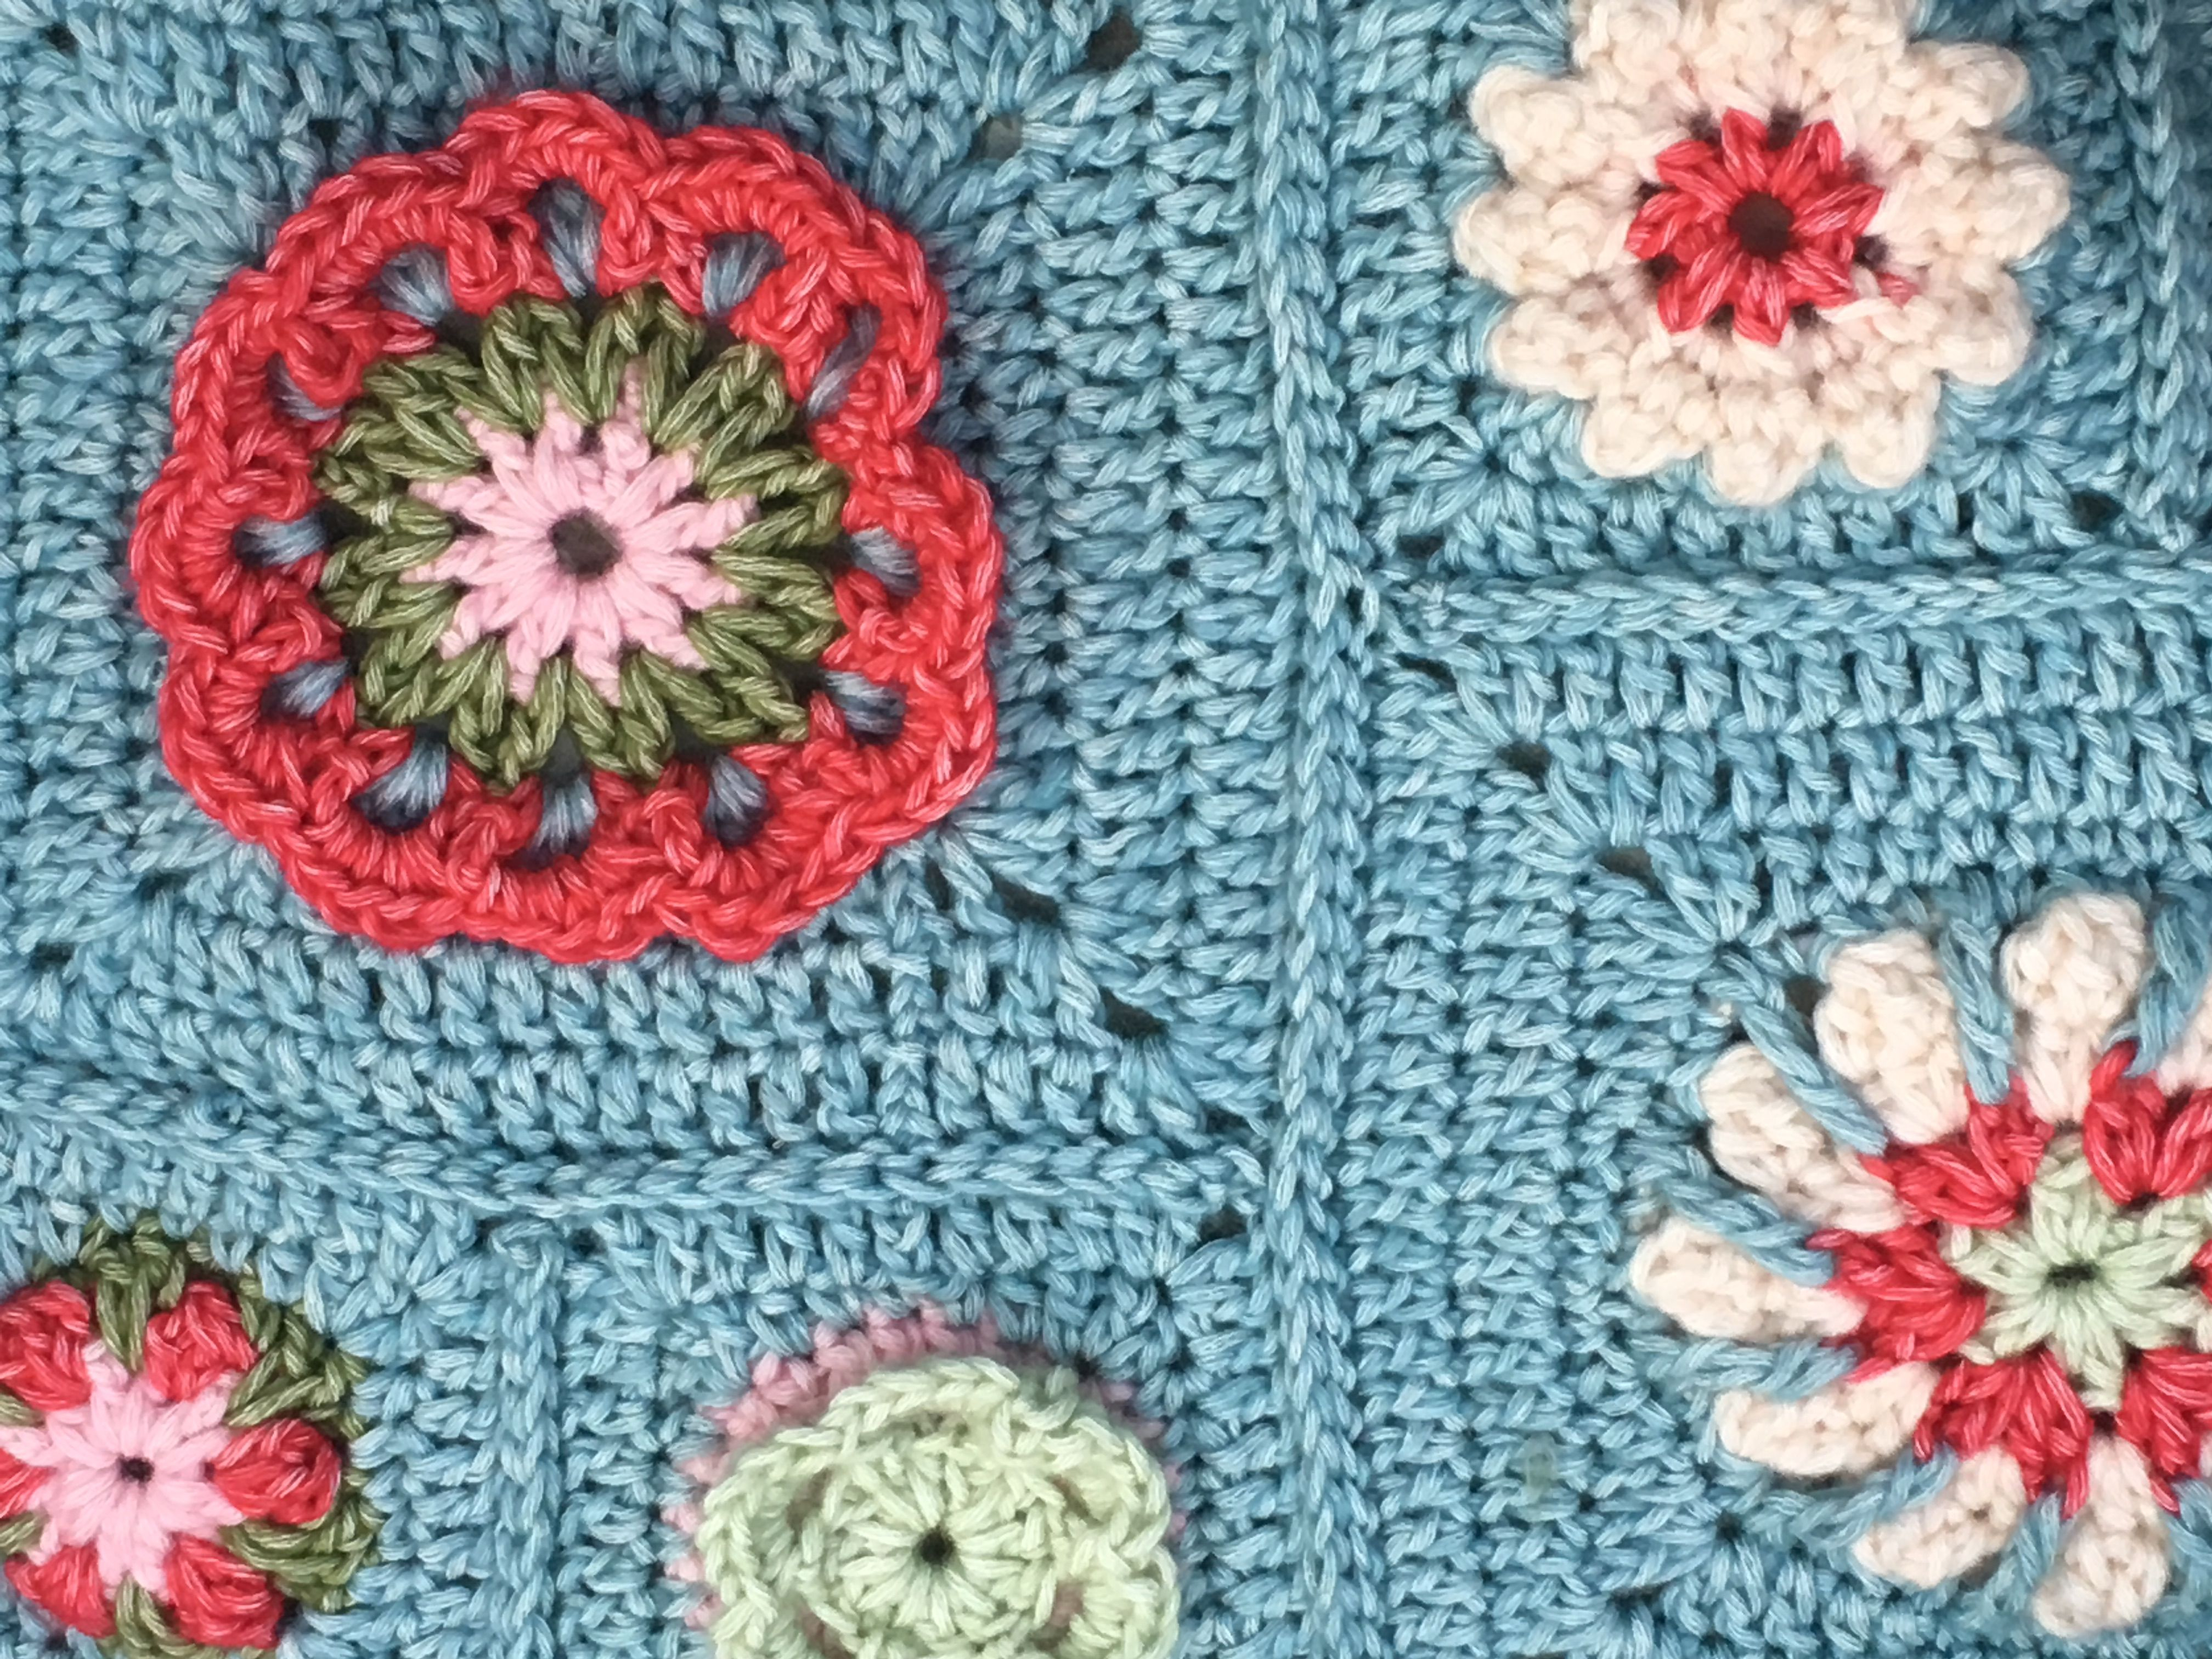 Crochet Sweet Pea Flower Pattern Sale At Deramores Coupon Code Dt4563 Through August 22 For Sweet Pea